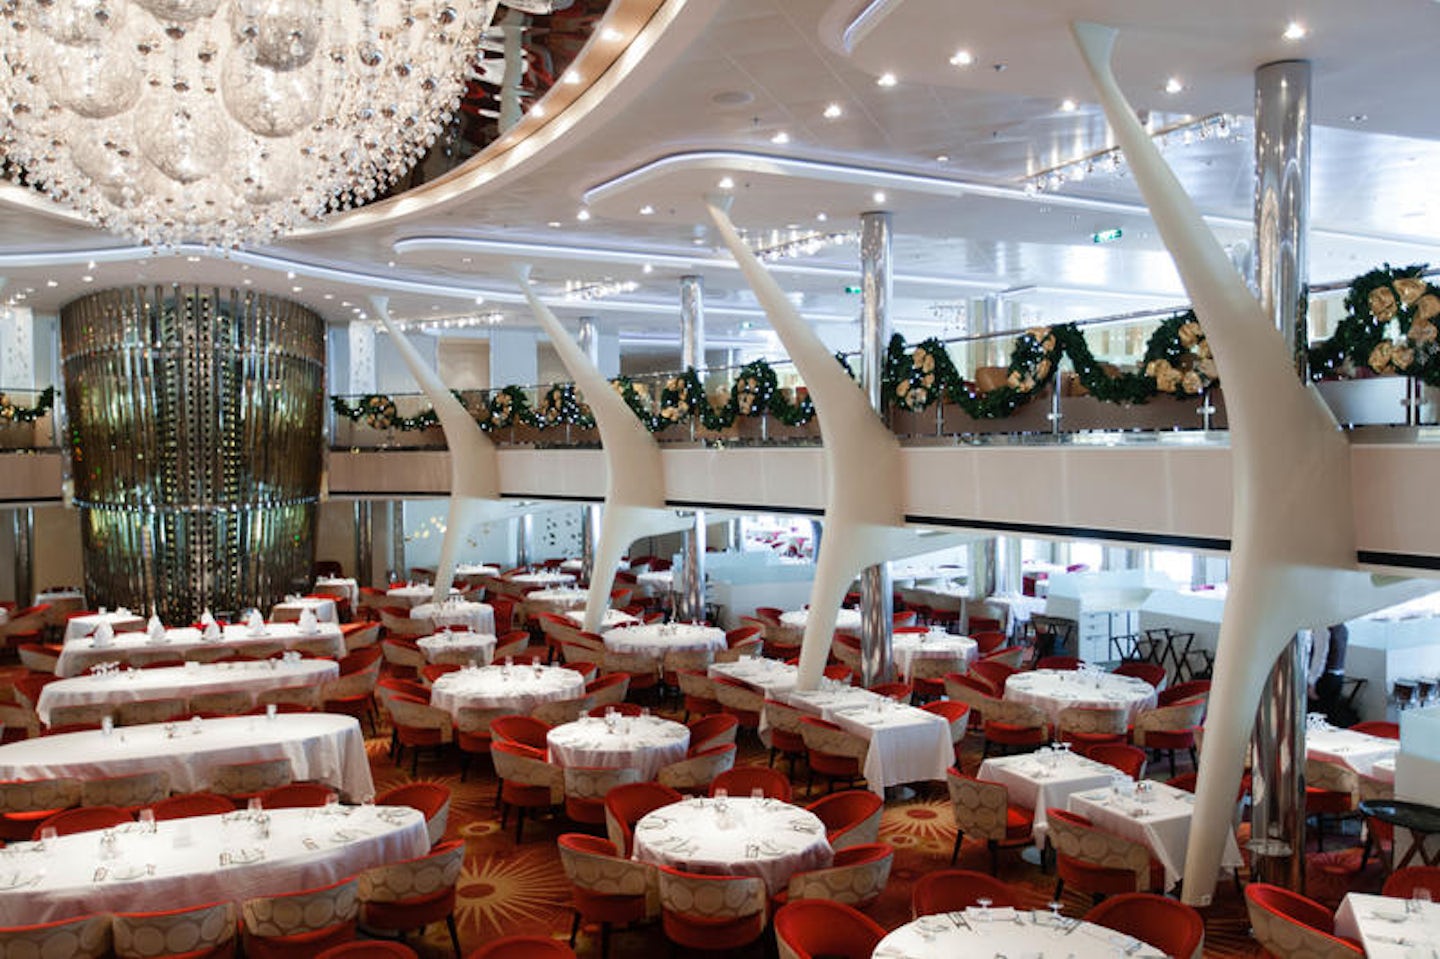 celebrity silhouette main dining room